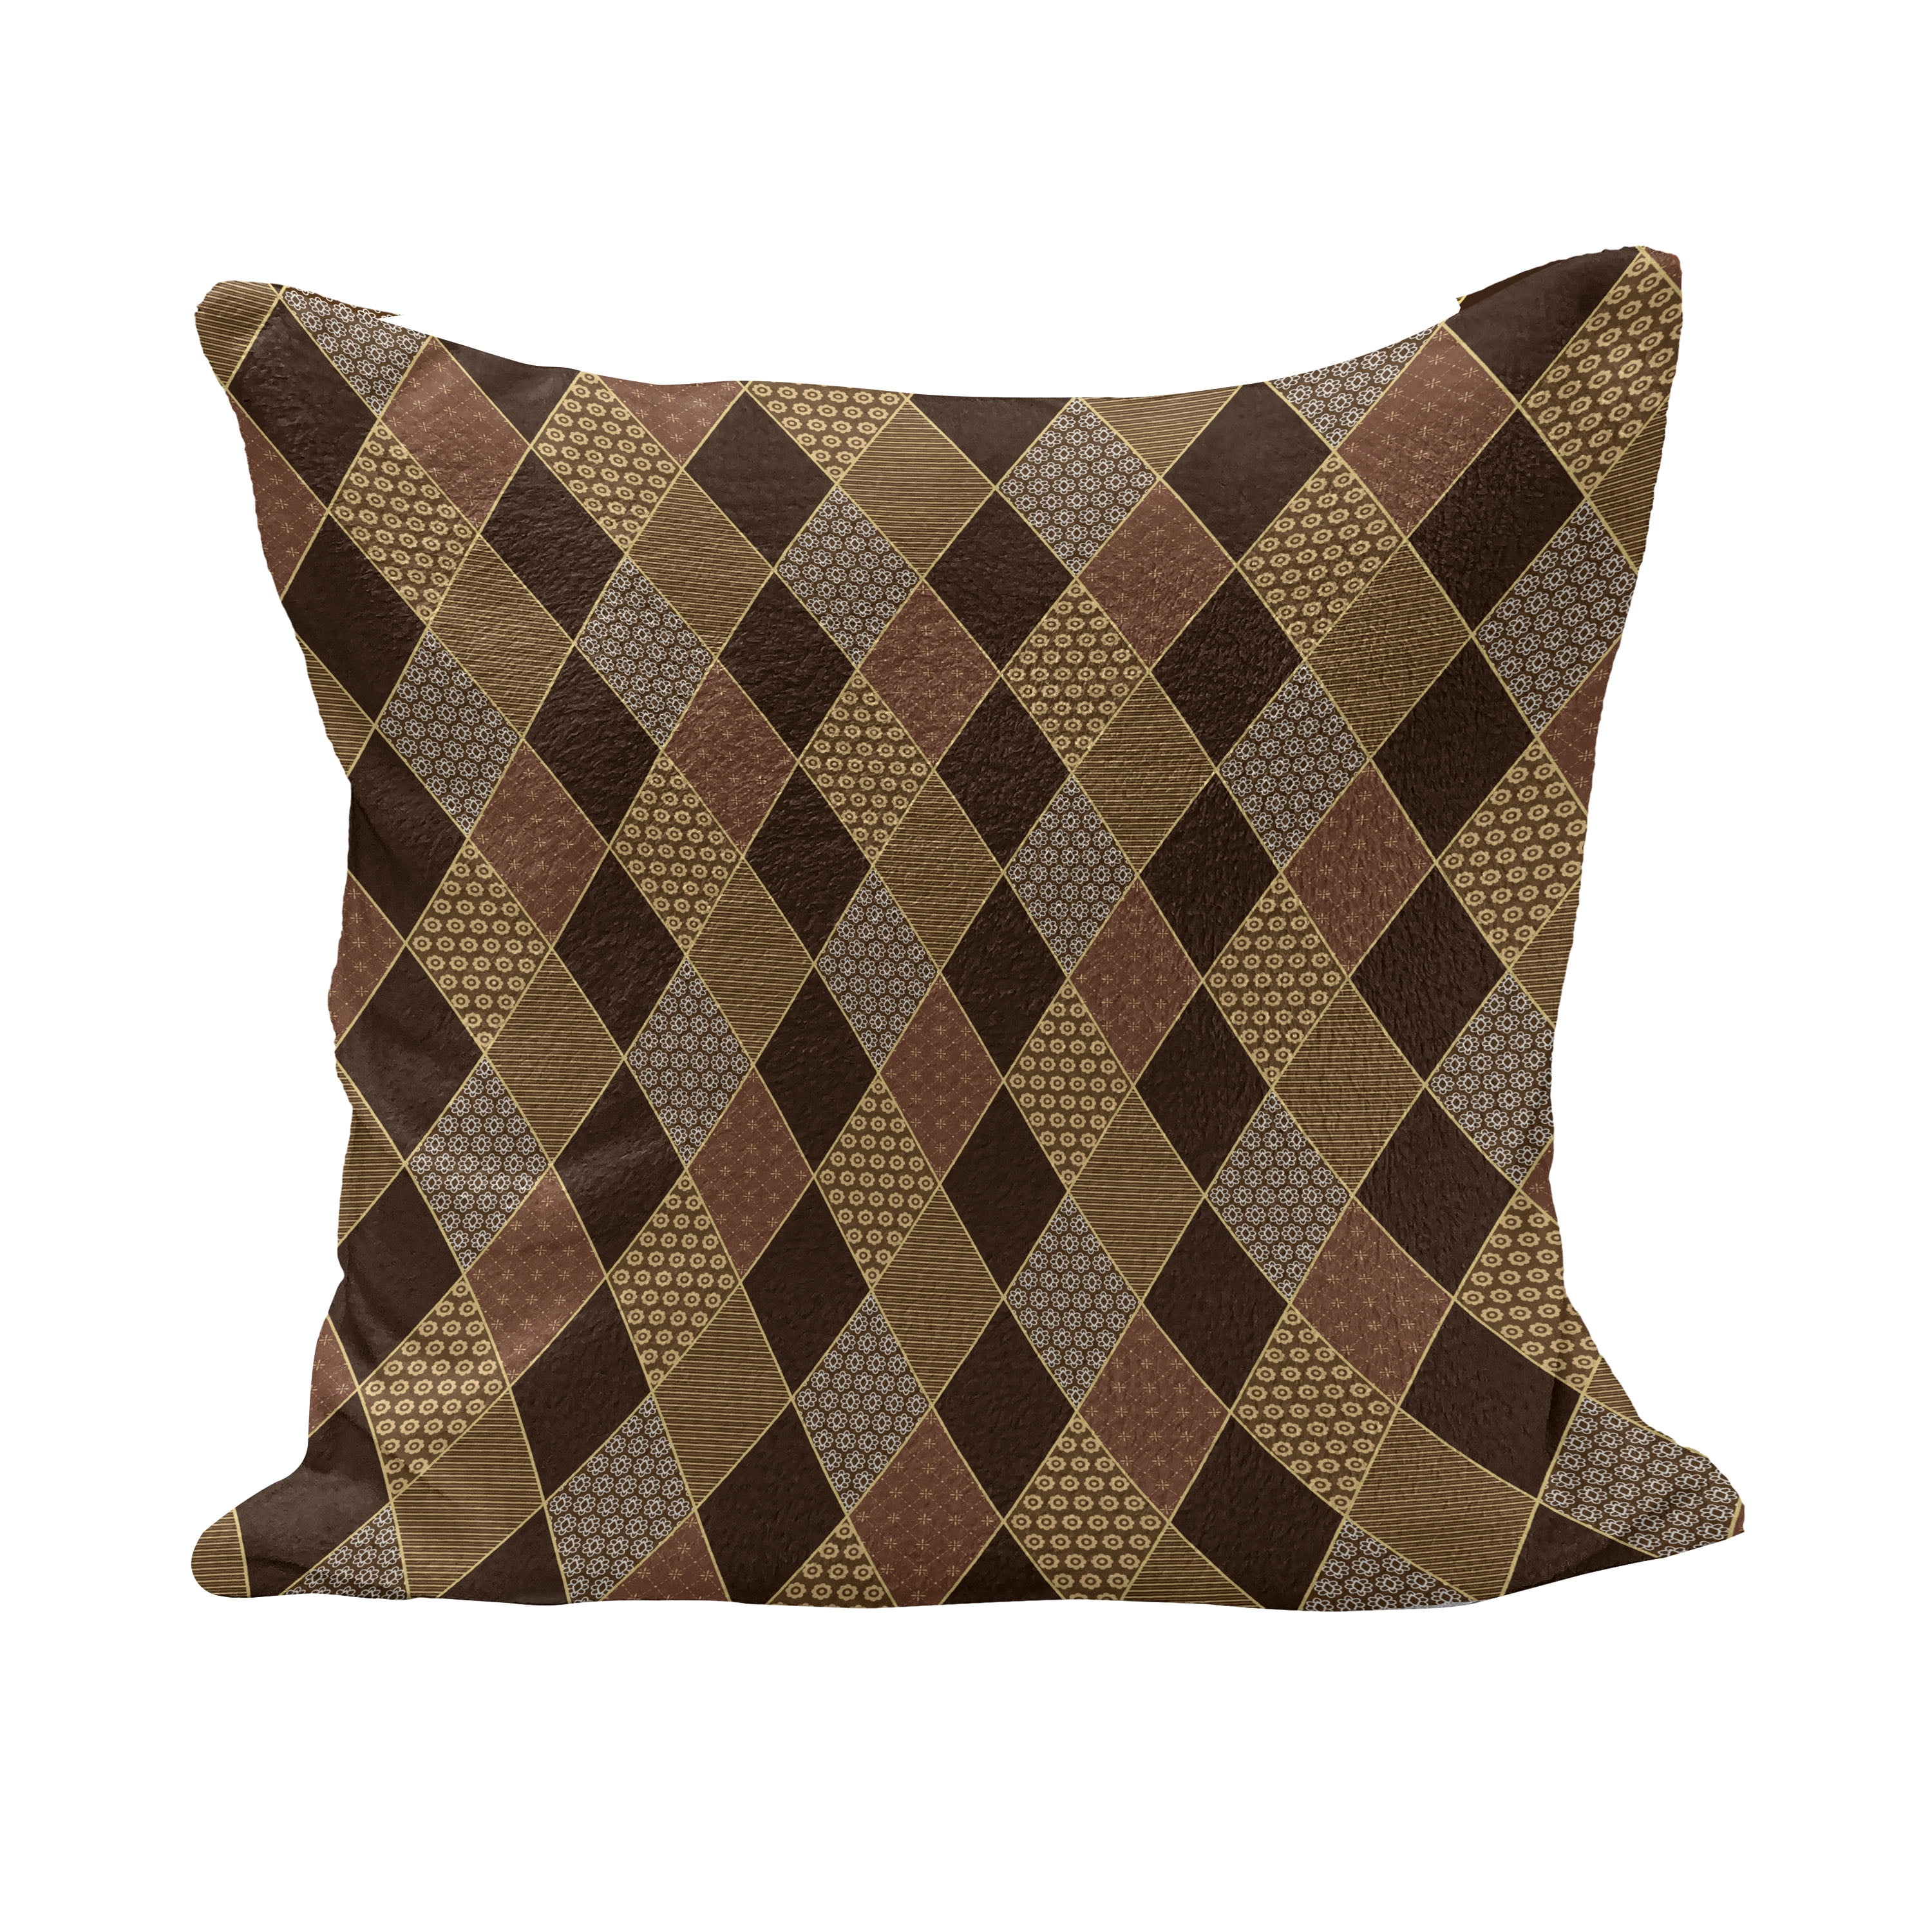 Decorative Brown Throw Pillow Cushion Cover Case 18x18 in US SELLER!!!